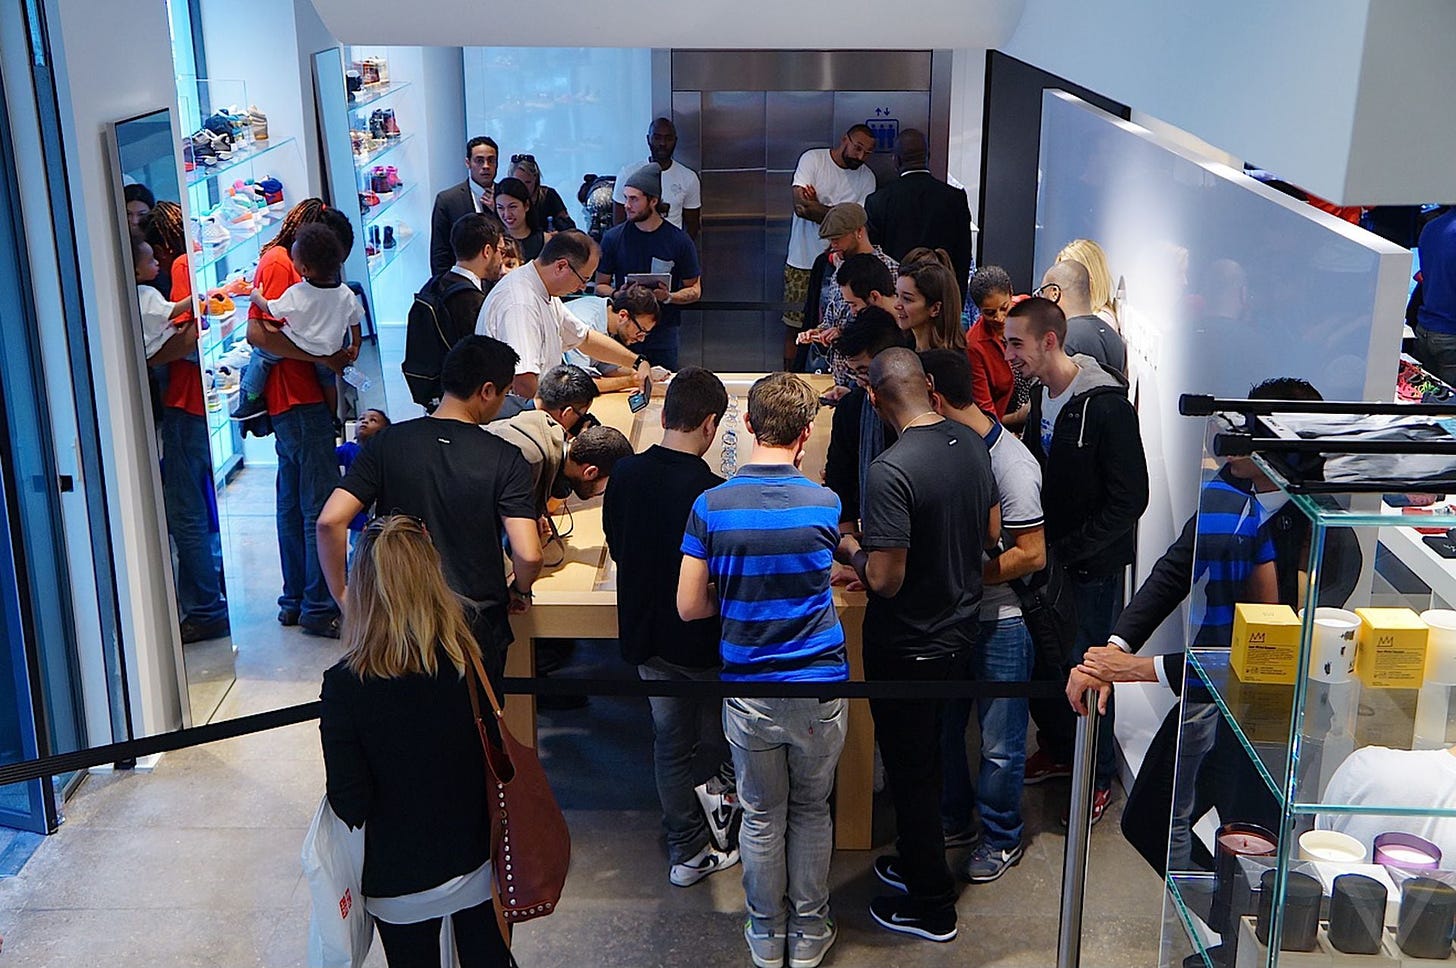 Customers gather around the glass Apple Watch display table at Colette in Paris.